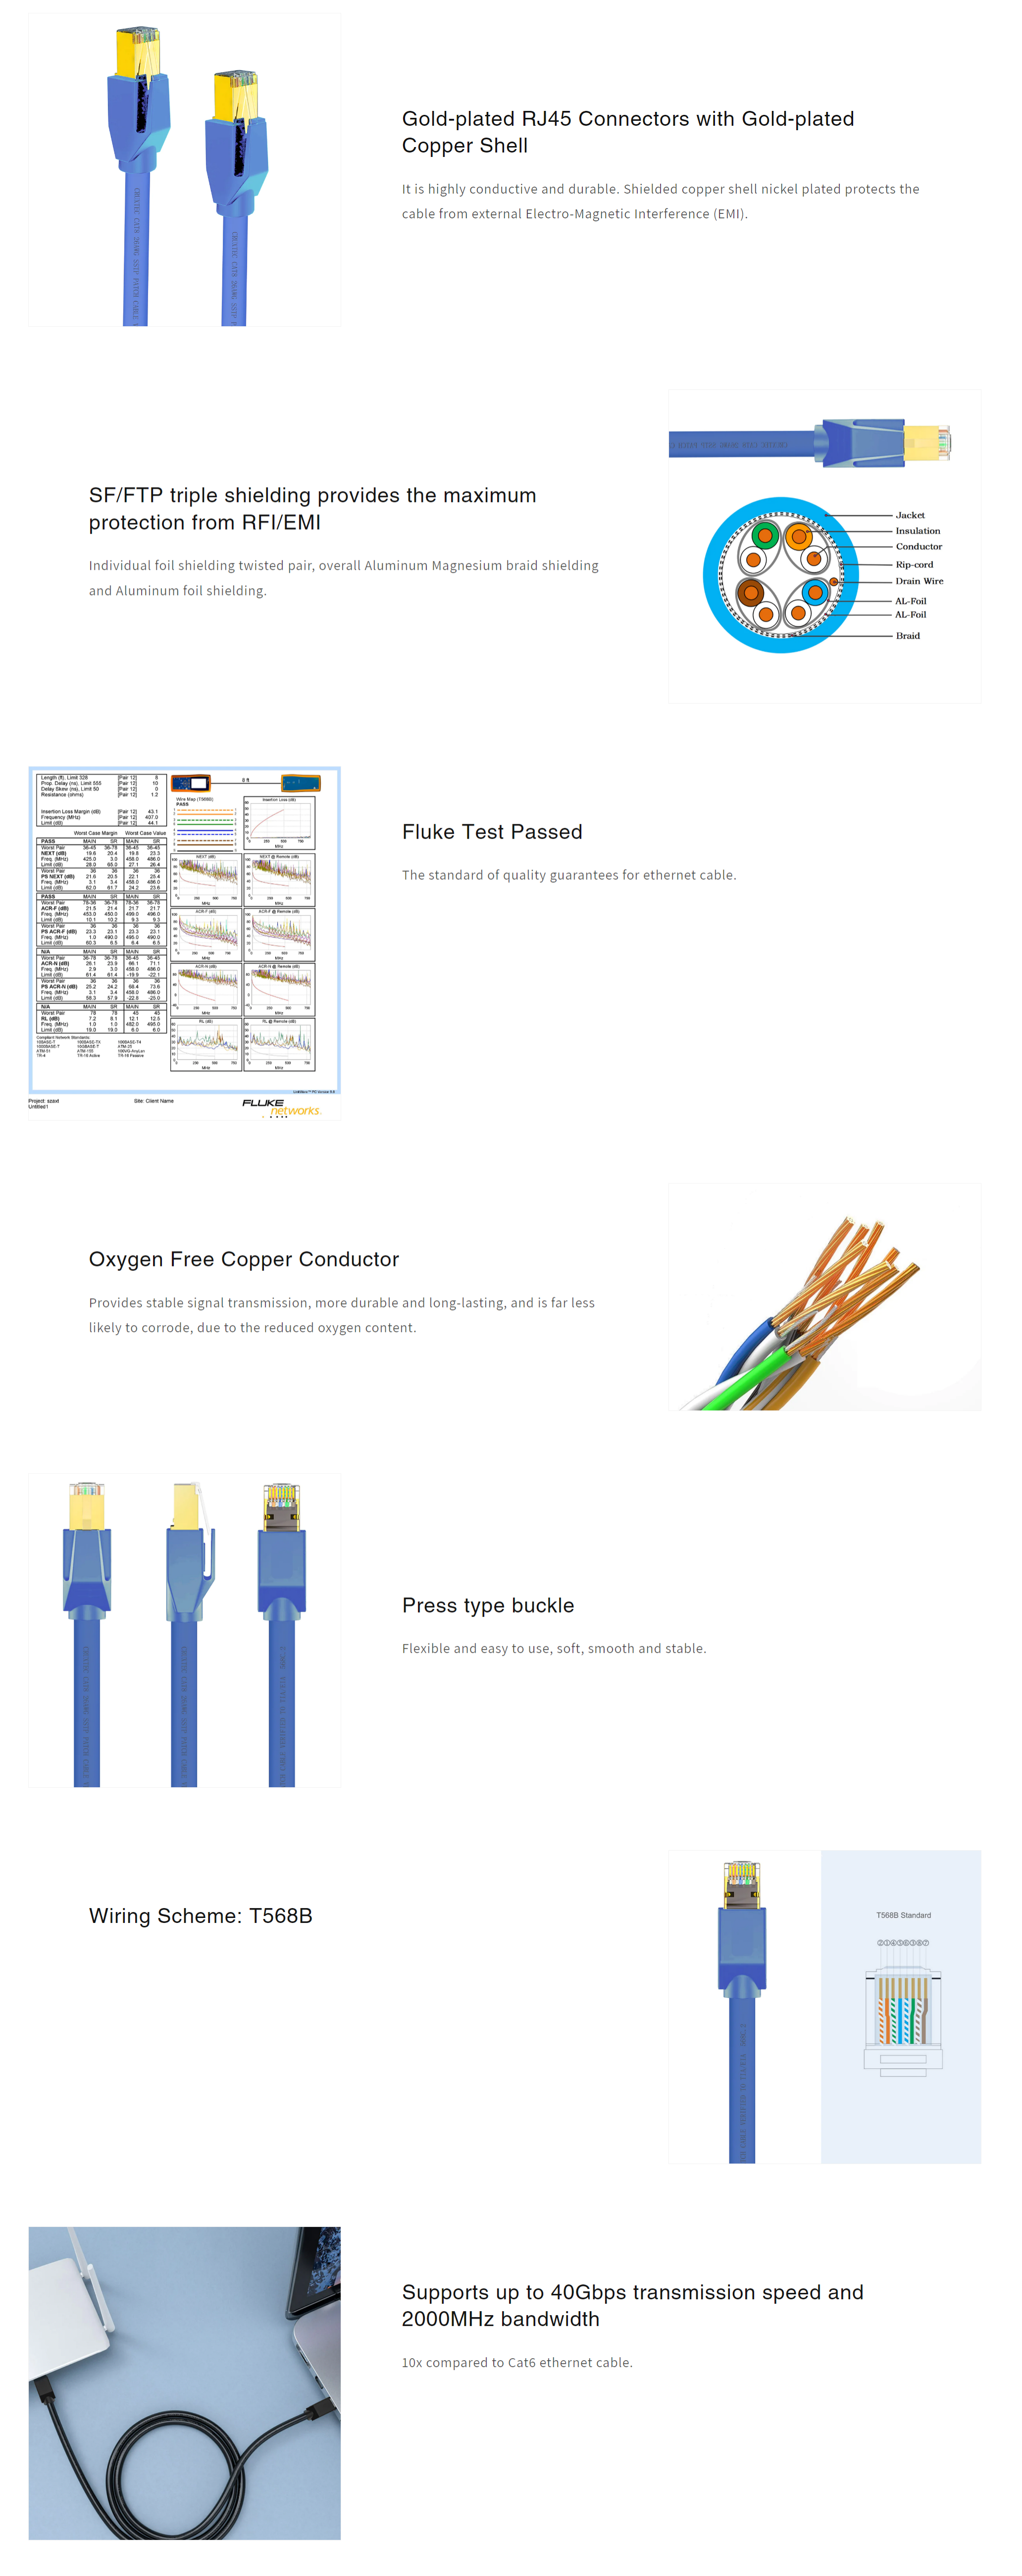 A large marketing image providing additional information about the product Cruxtec CAT8 5m 40GbE SF/FTP Triple Shielding Ethernet Cable Blue - Additional alt info not provided